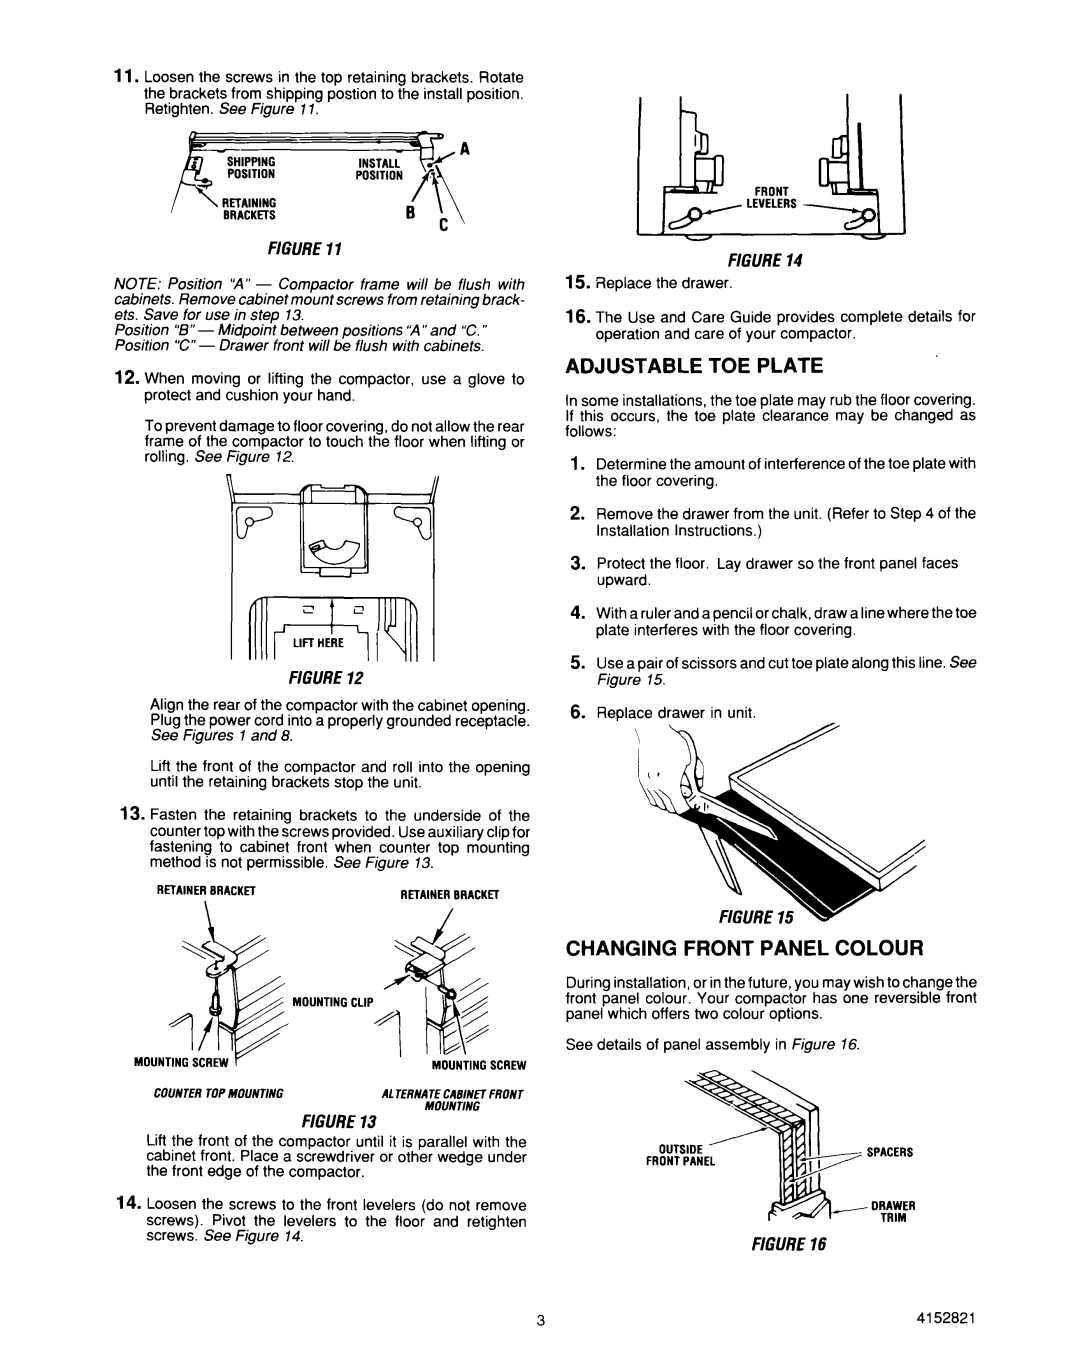 Whirlpool 4152821 installation instructions Adjustable Toe Plate, Changing Front Panel Colour 